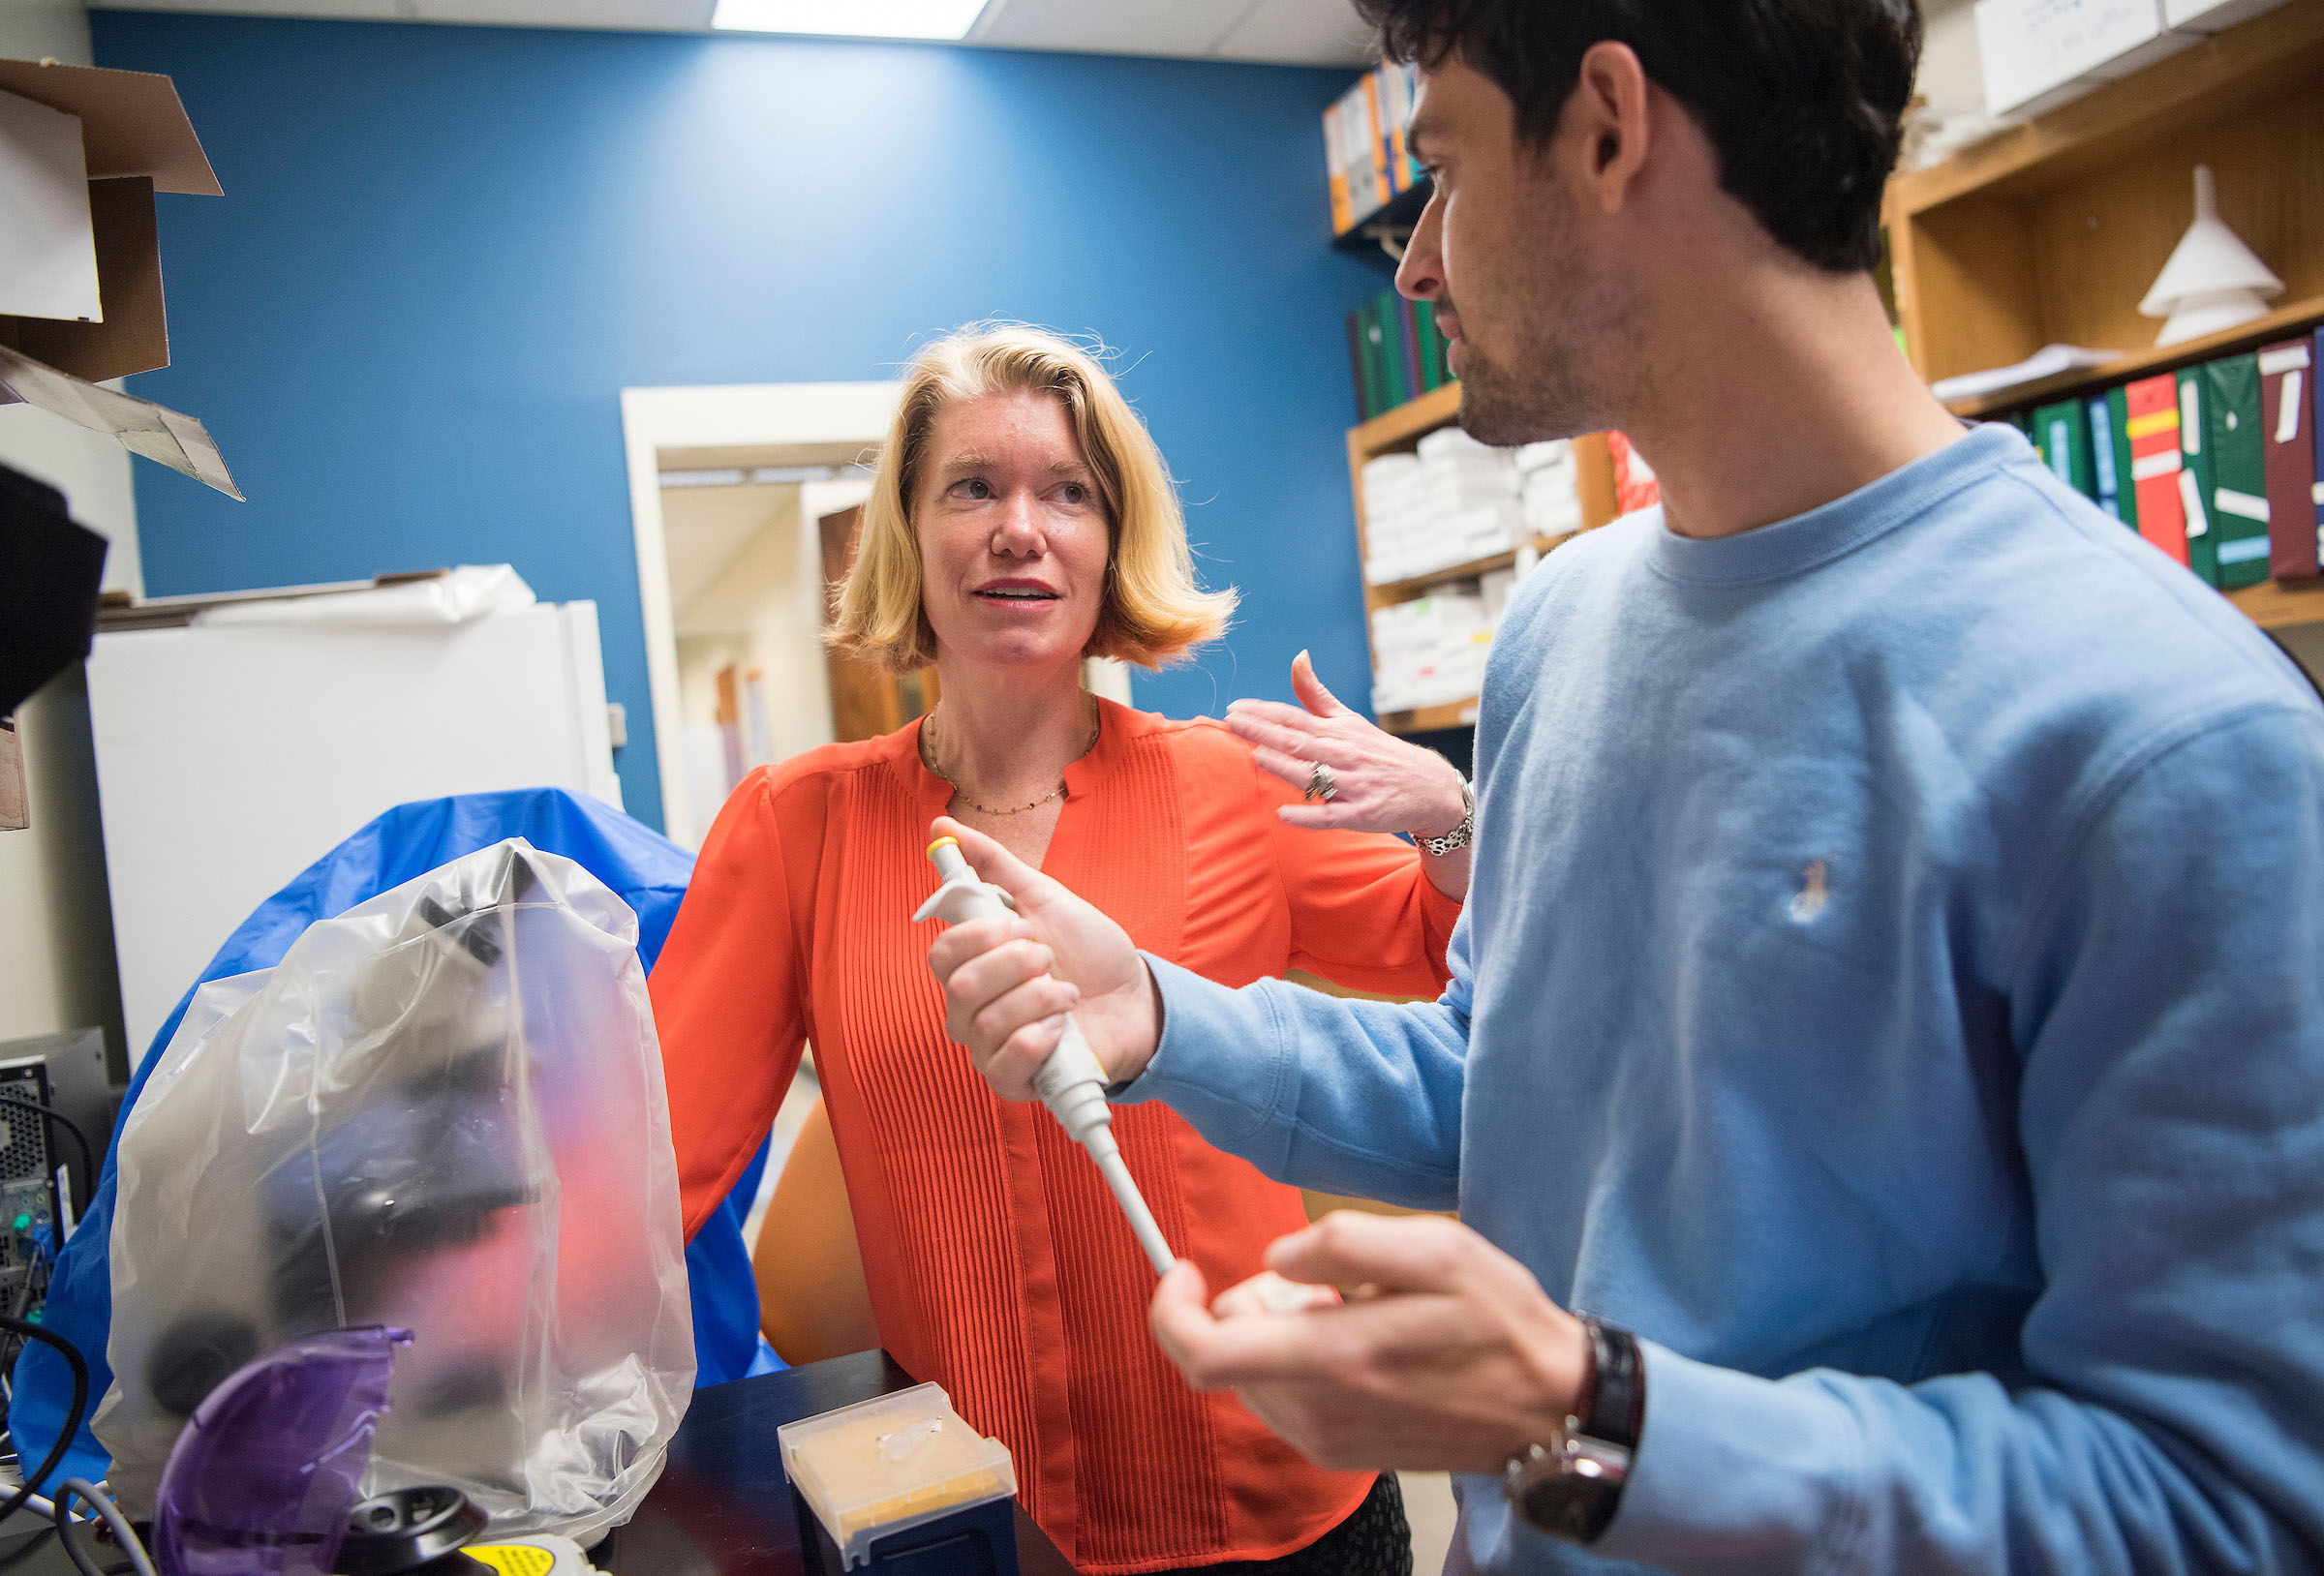 Amy Gladfelter (left) received a "big ideas" grant from the National Science Foundation to support interdisciplinary research. (photo by Jon Gardiner) She is pictured in a lab setting with one of her students.